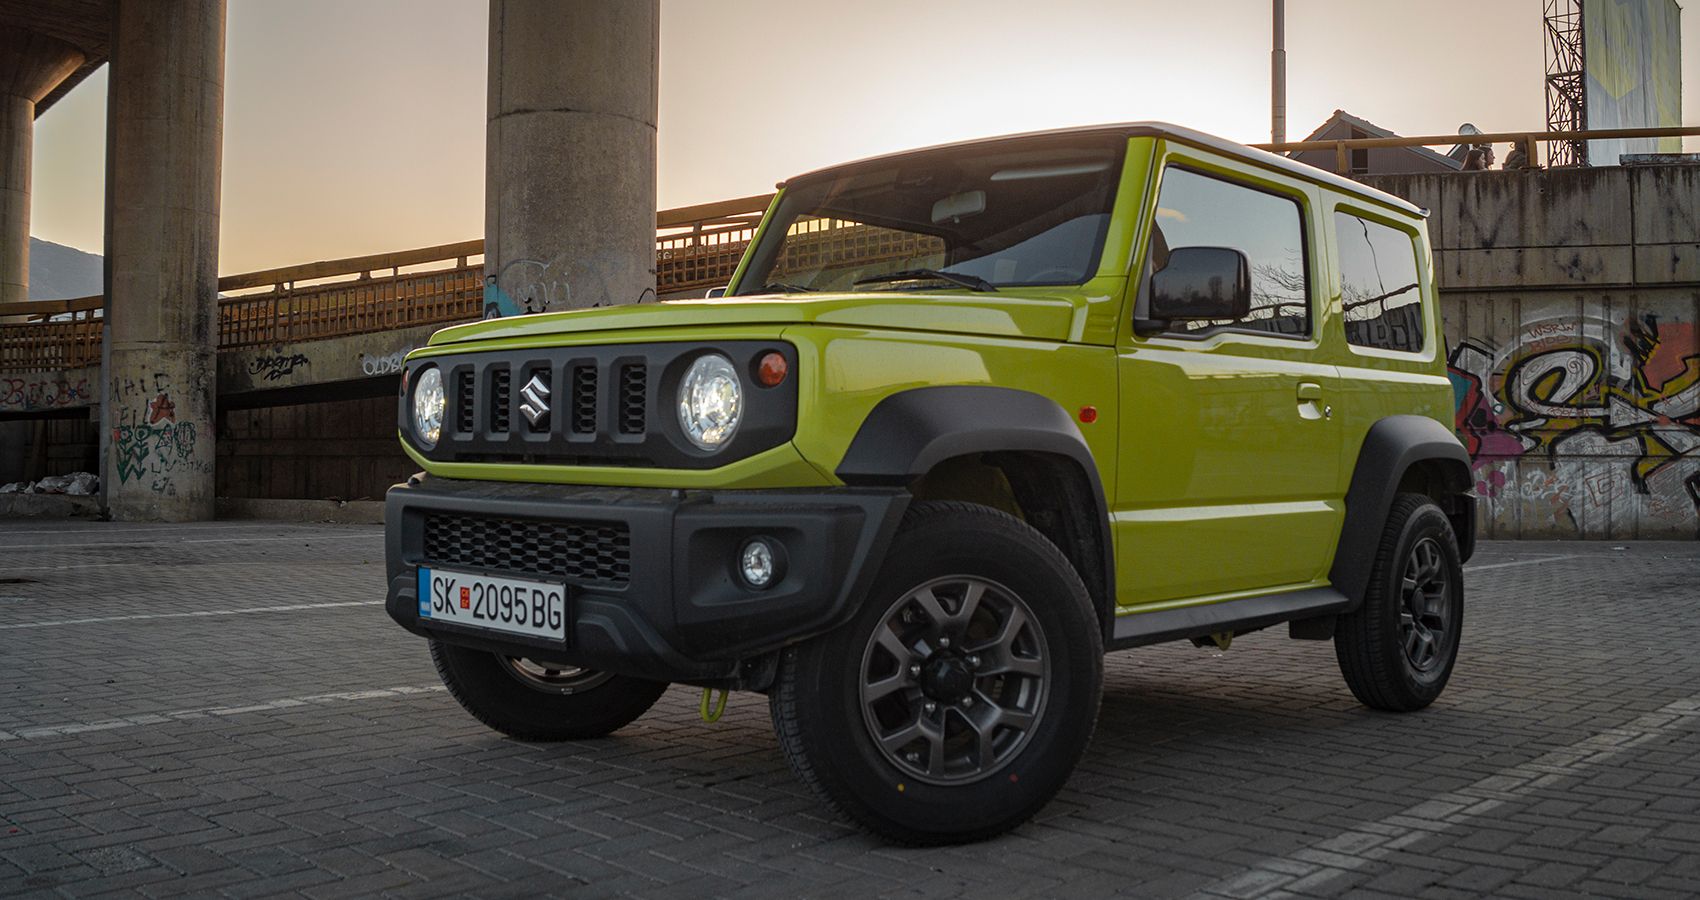 We drove the Suzuki Jimny in America, and it was good - CNET